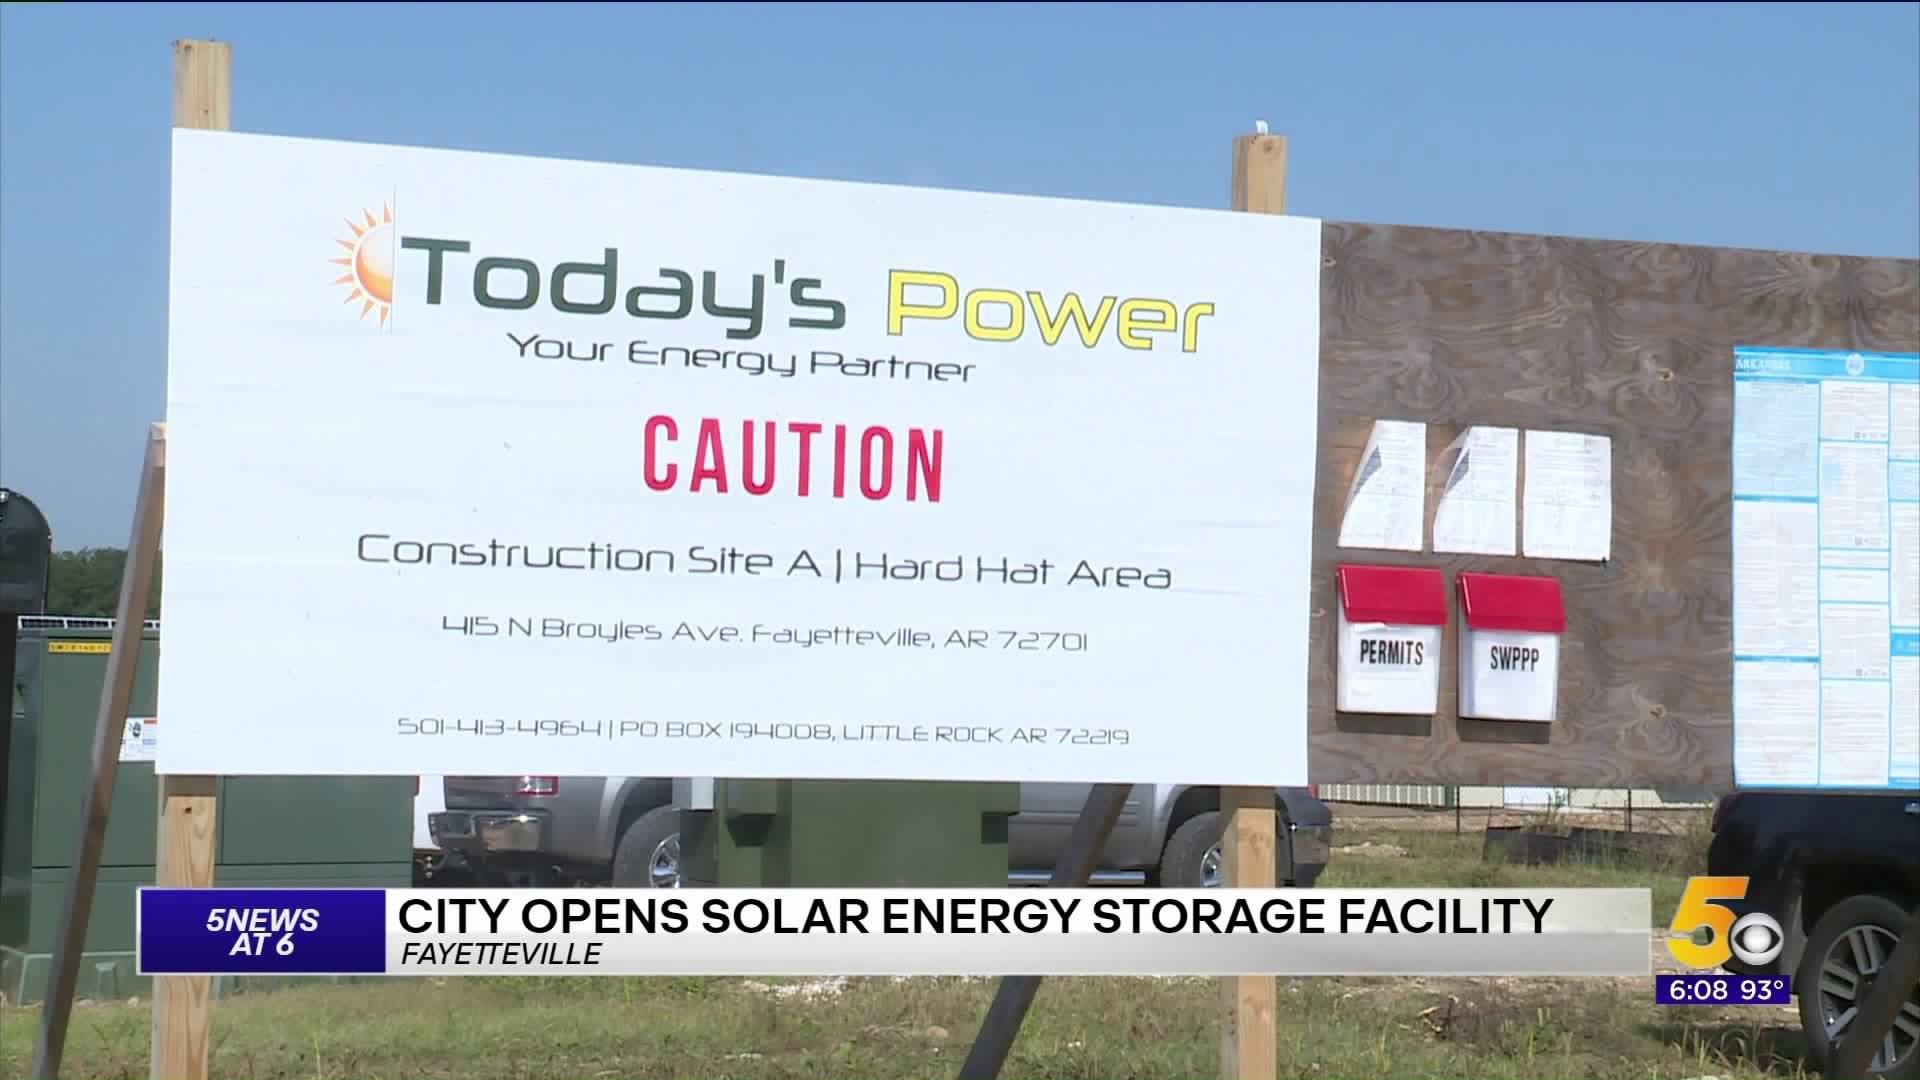 Fayetteville Turns To Renewable Energy With Wastewater Treatment Plant Solar Arrays